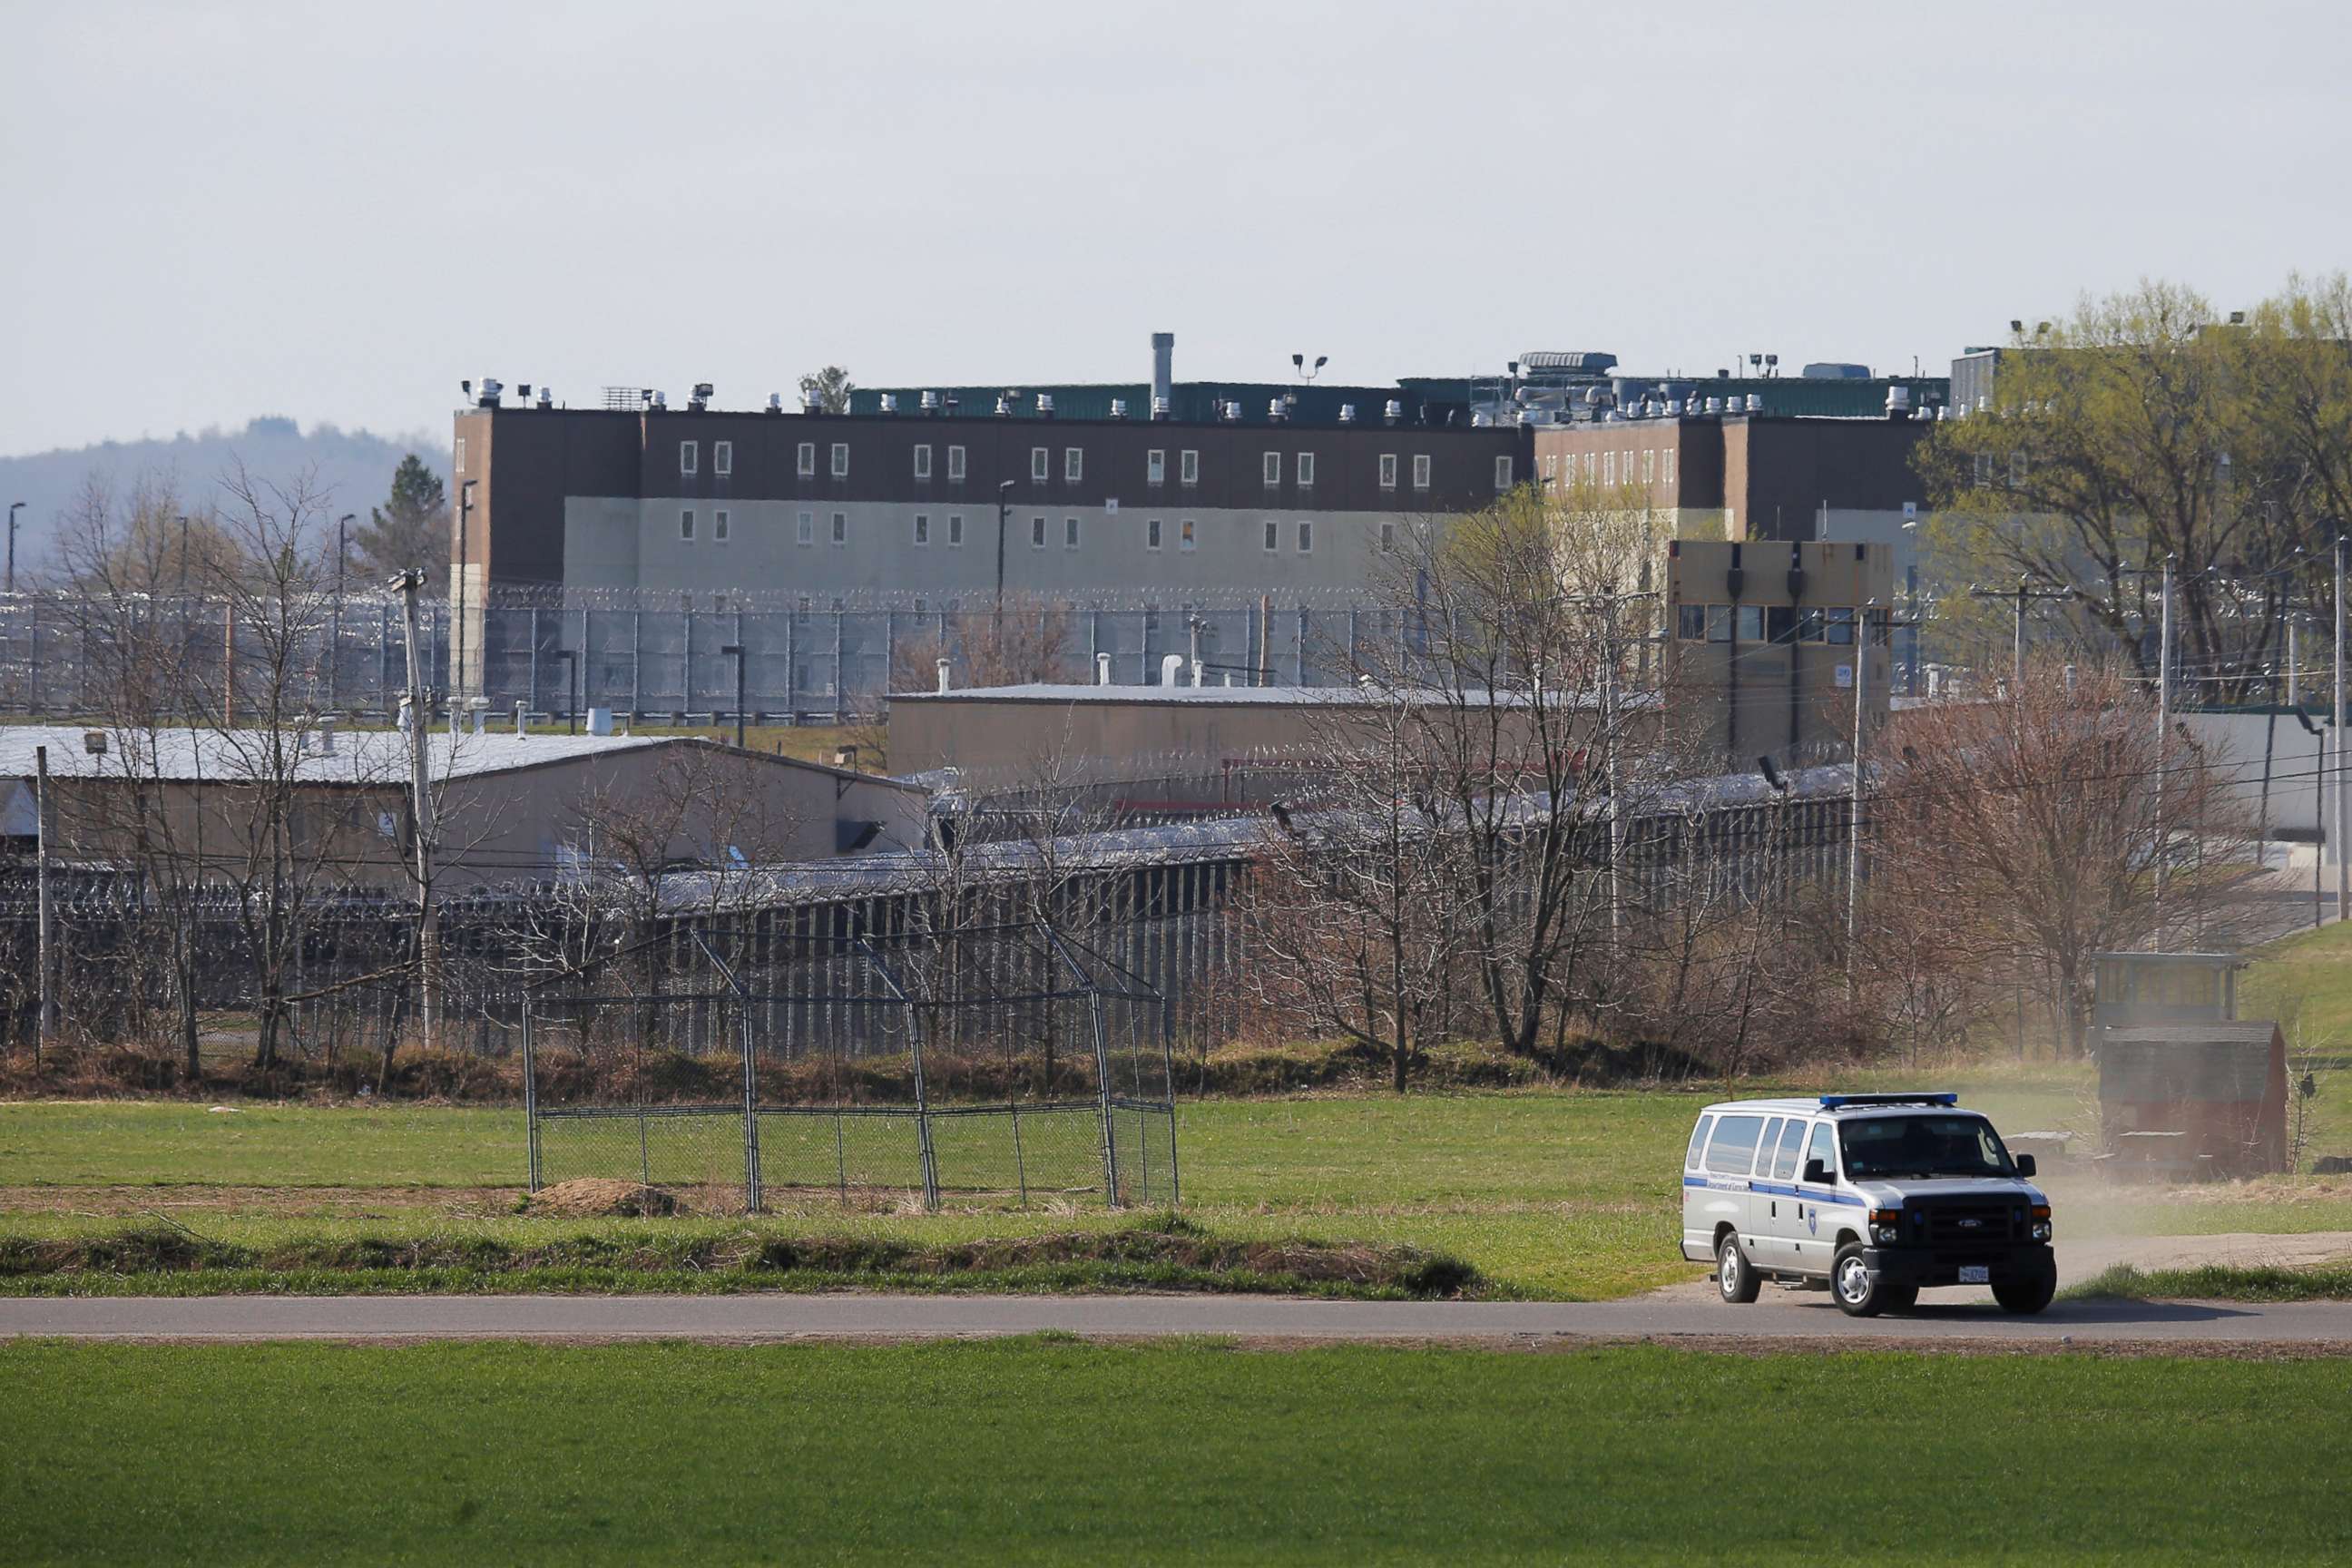 PHOTO: In this April 19, 2017, file photo, a prison van drives past the Souza Baranowski Correctional Center in Shirley, Mass.